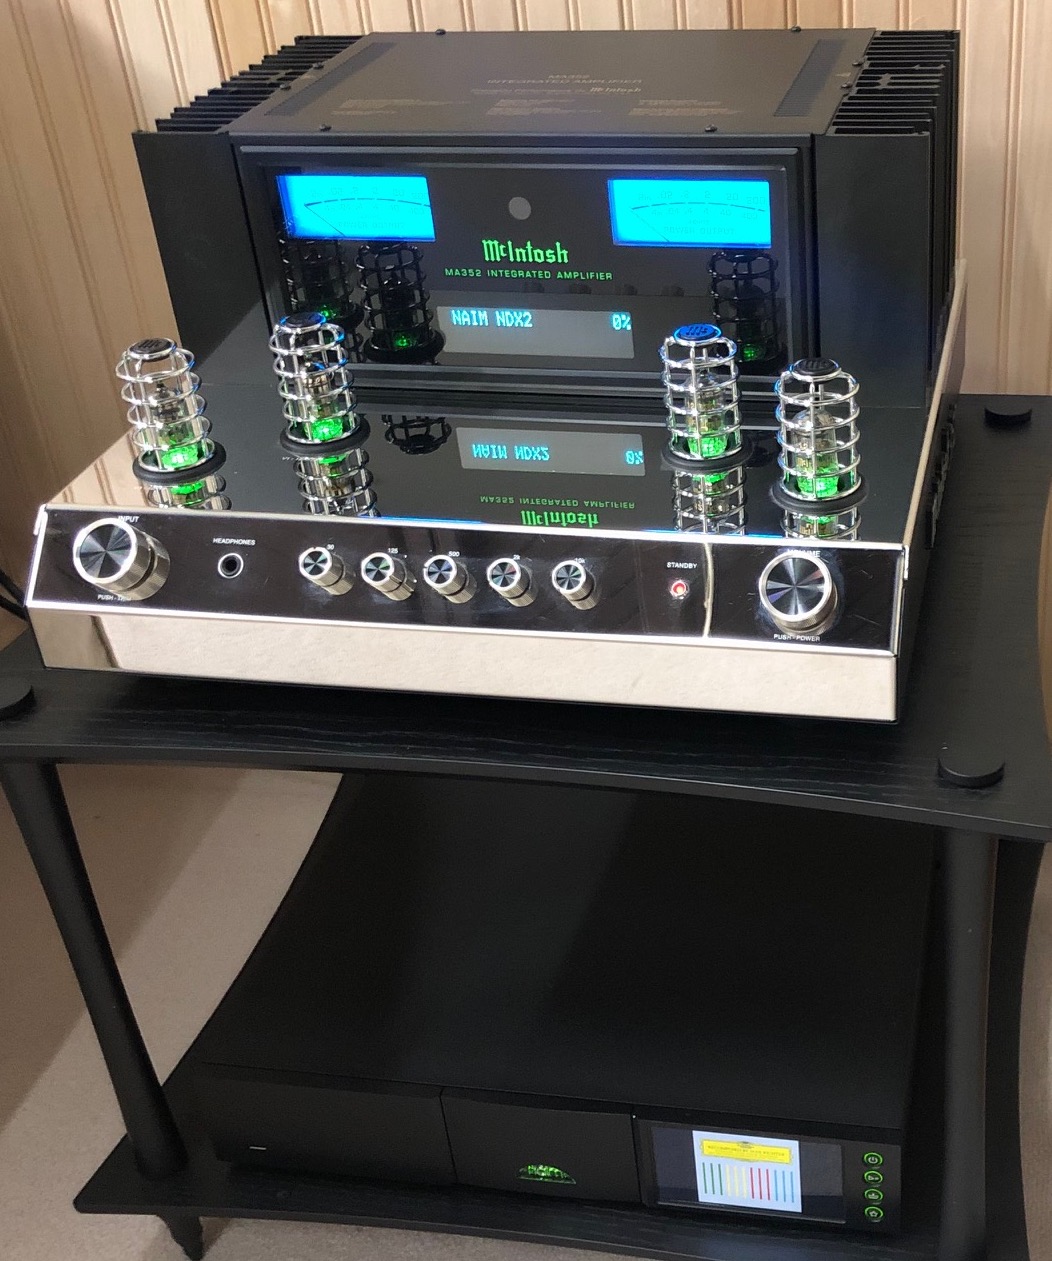 McIntosh MA352 Integrated Amplifier with Naim NDX2 from Basil Audio